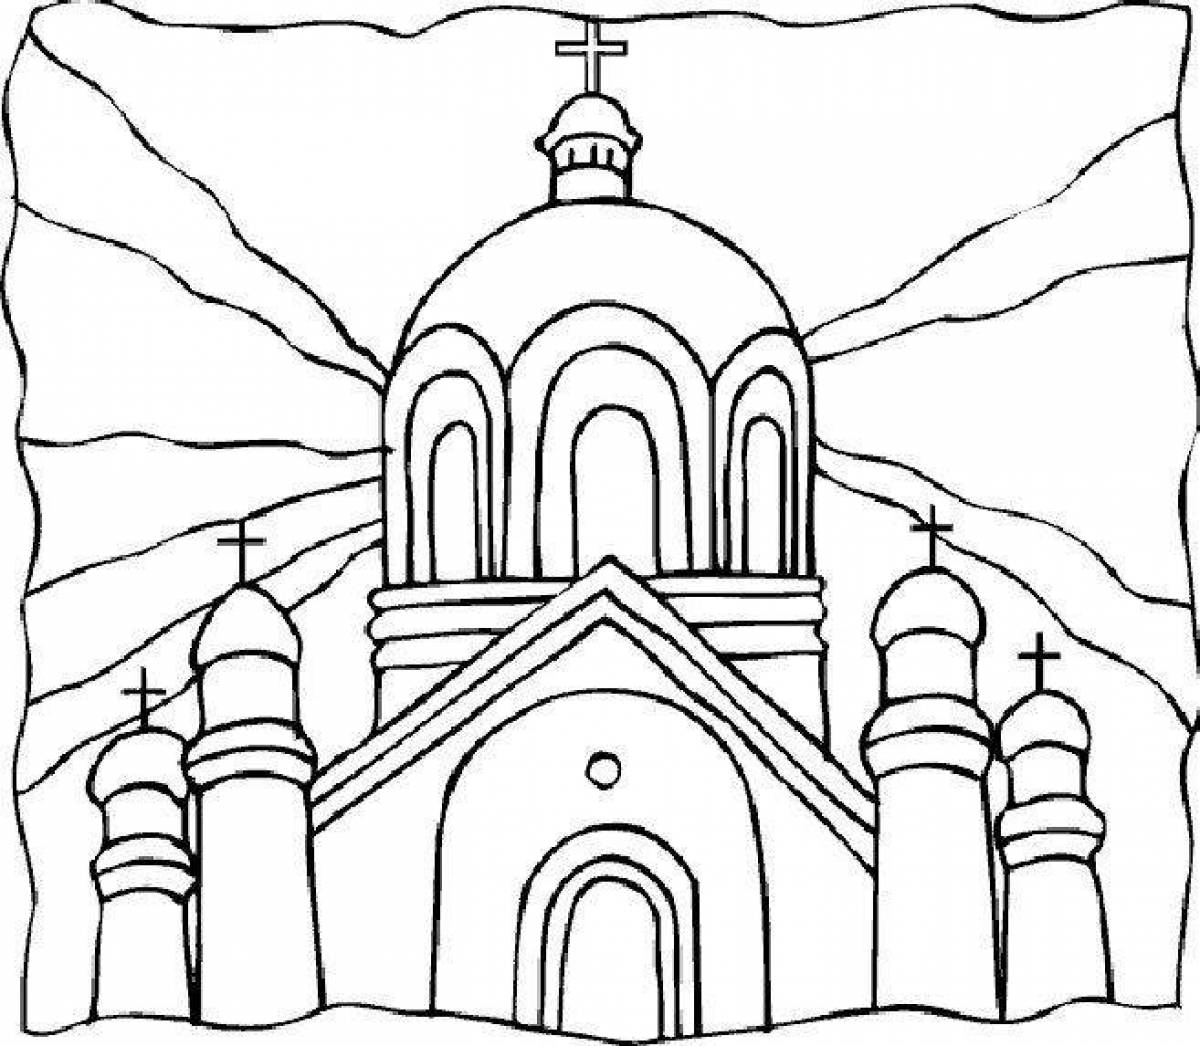 Coloring page ornate cathedral